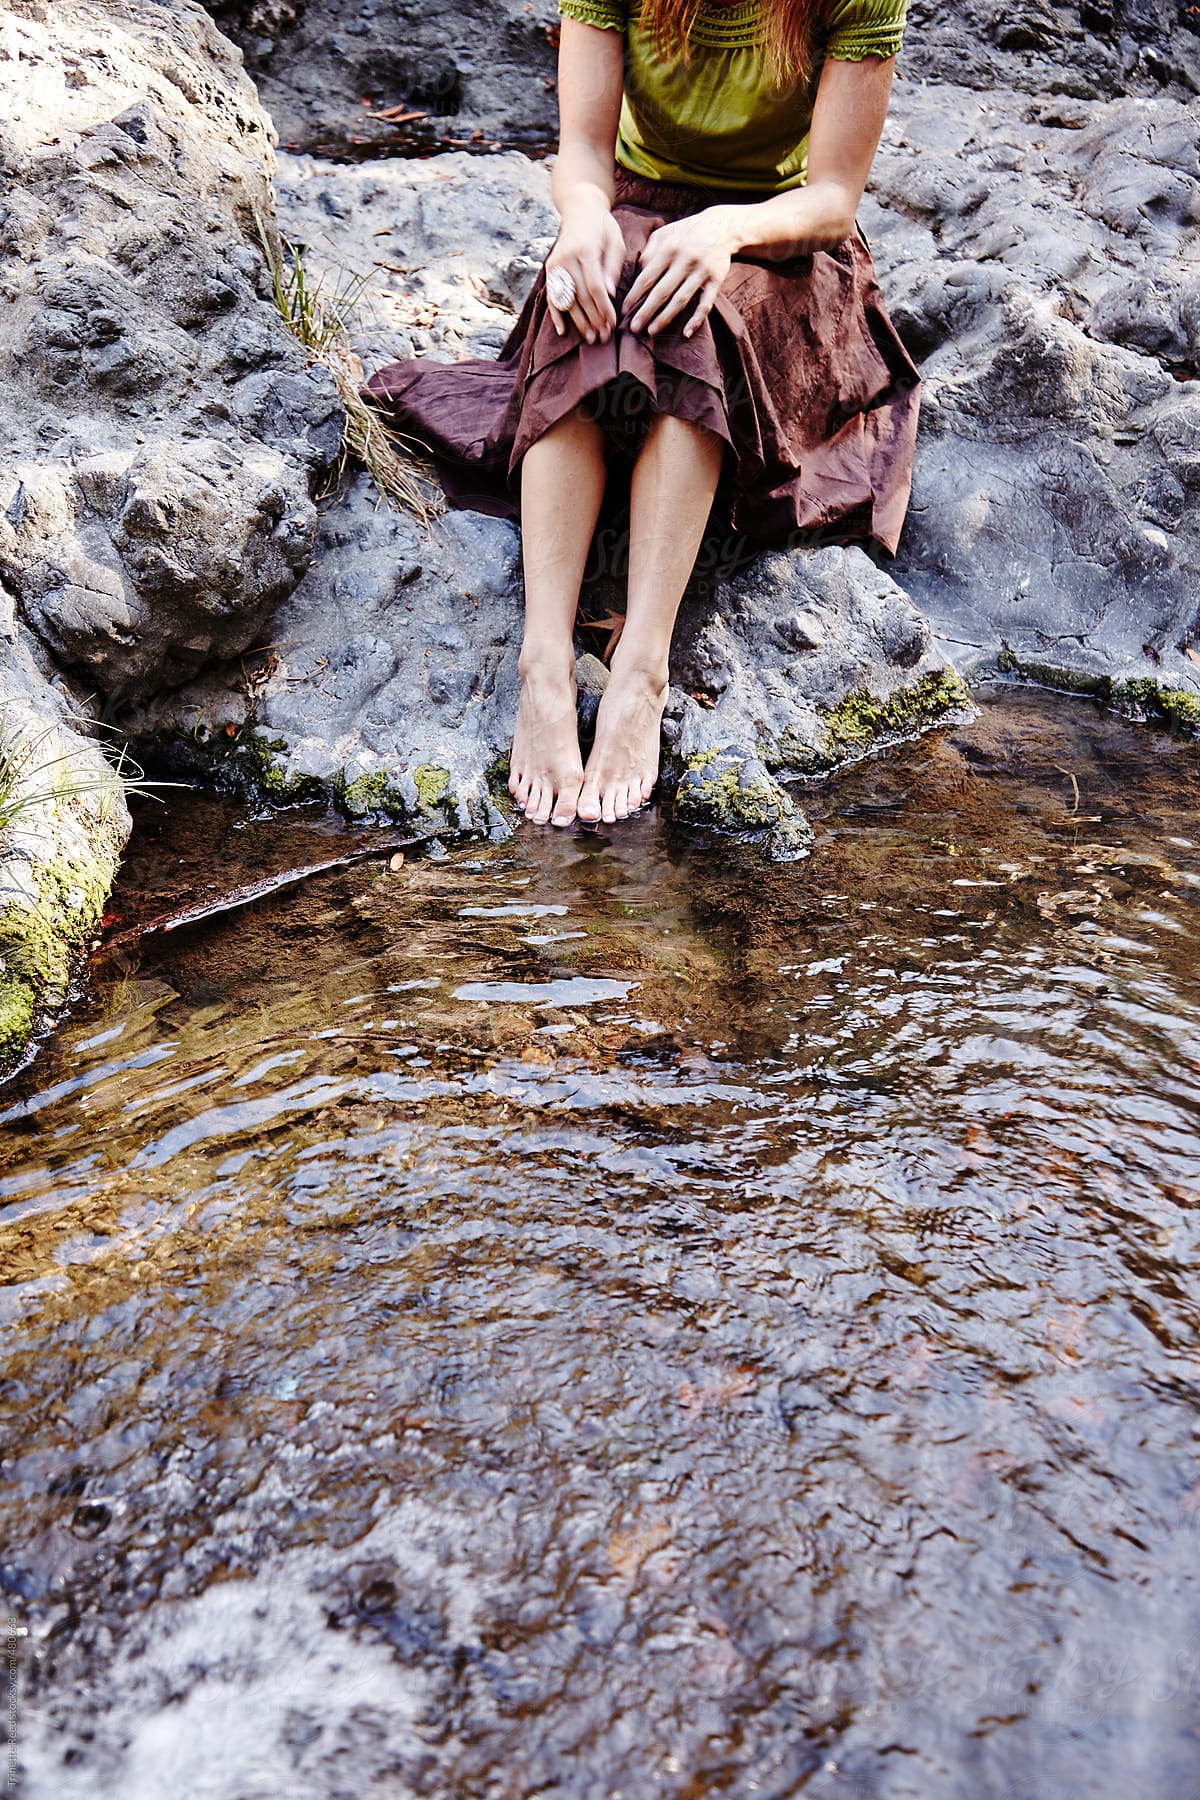 Woman relaxing in nature with feet in stream